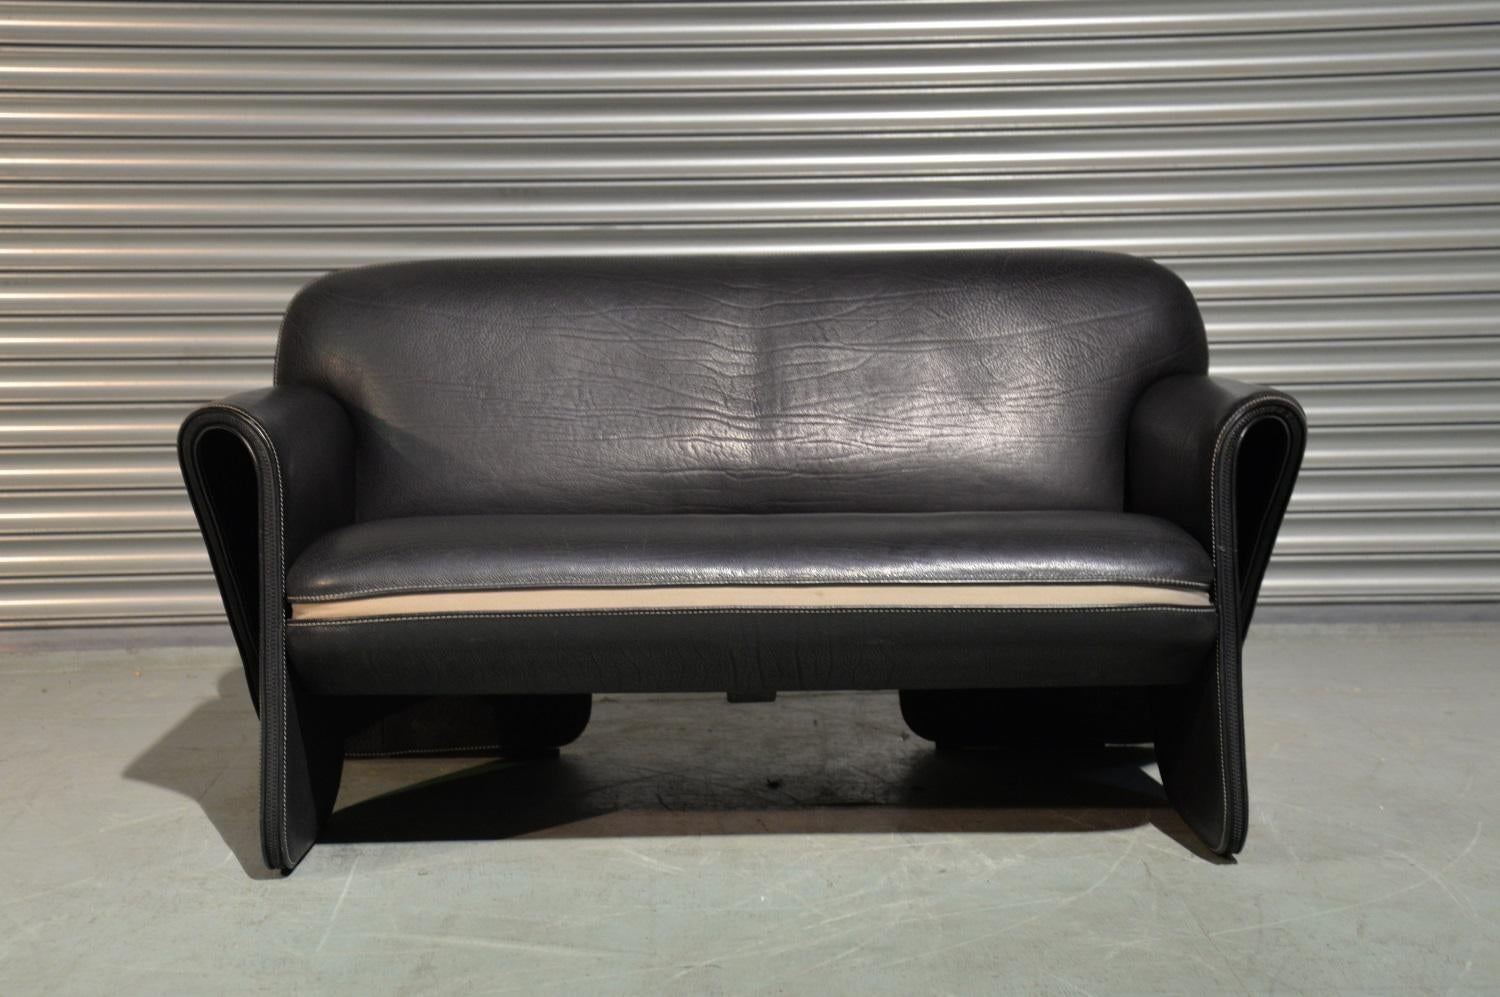 We are delighted to bring to you an ultra rare vintage De Sede DS 125 sofa by Gerd Lange in 1978. These sculptural hand built pieces are upholstered in 3mm-5mm thick black neck leather with a cream decorative zipper seam and detail. This piece is